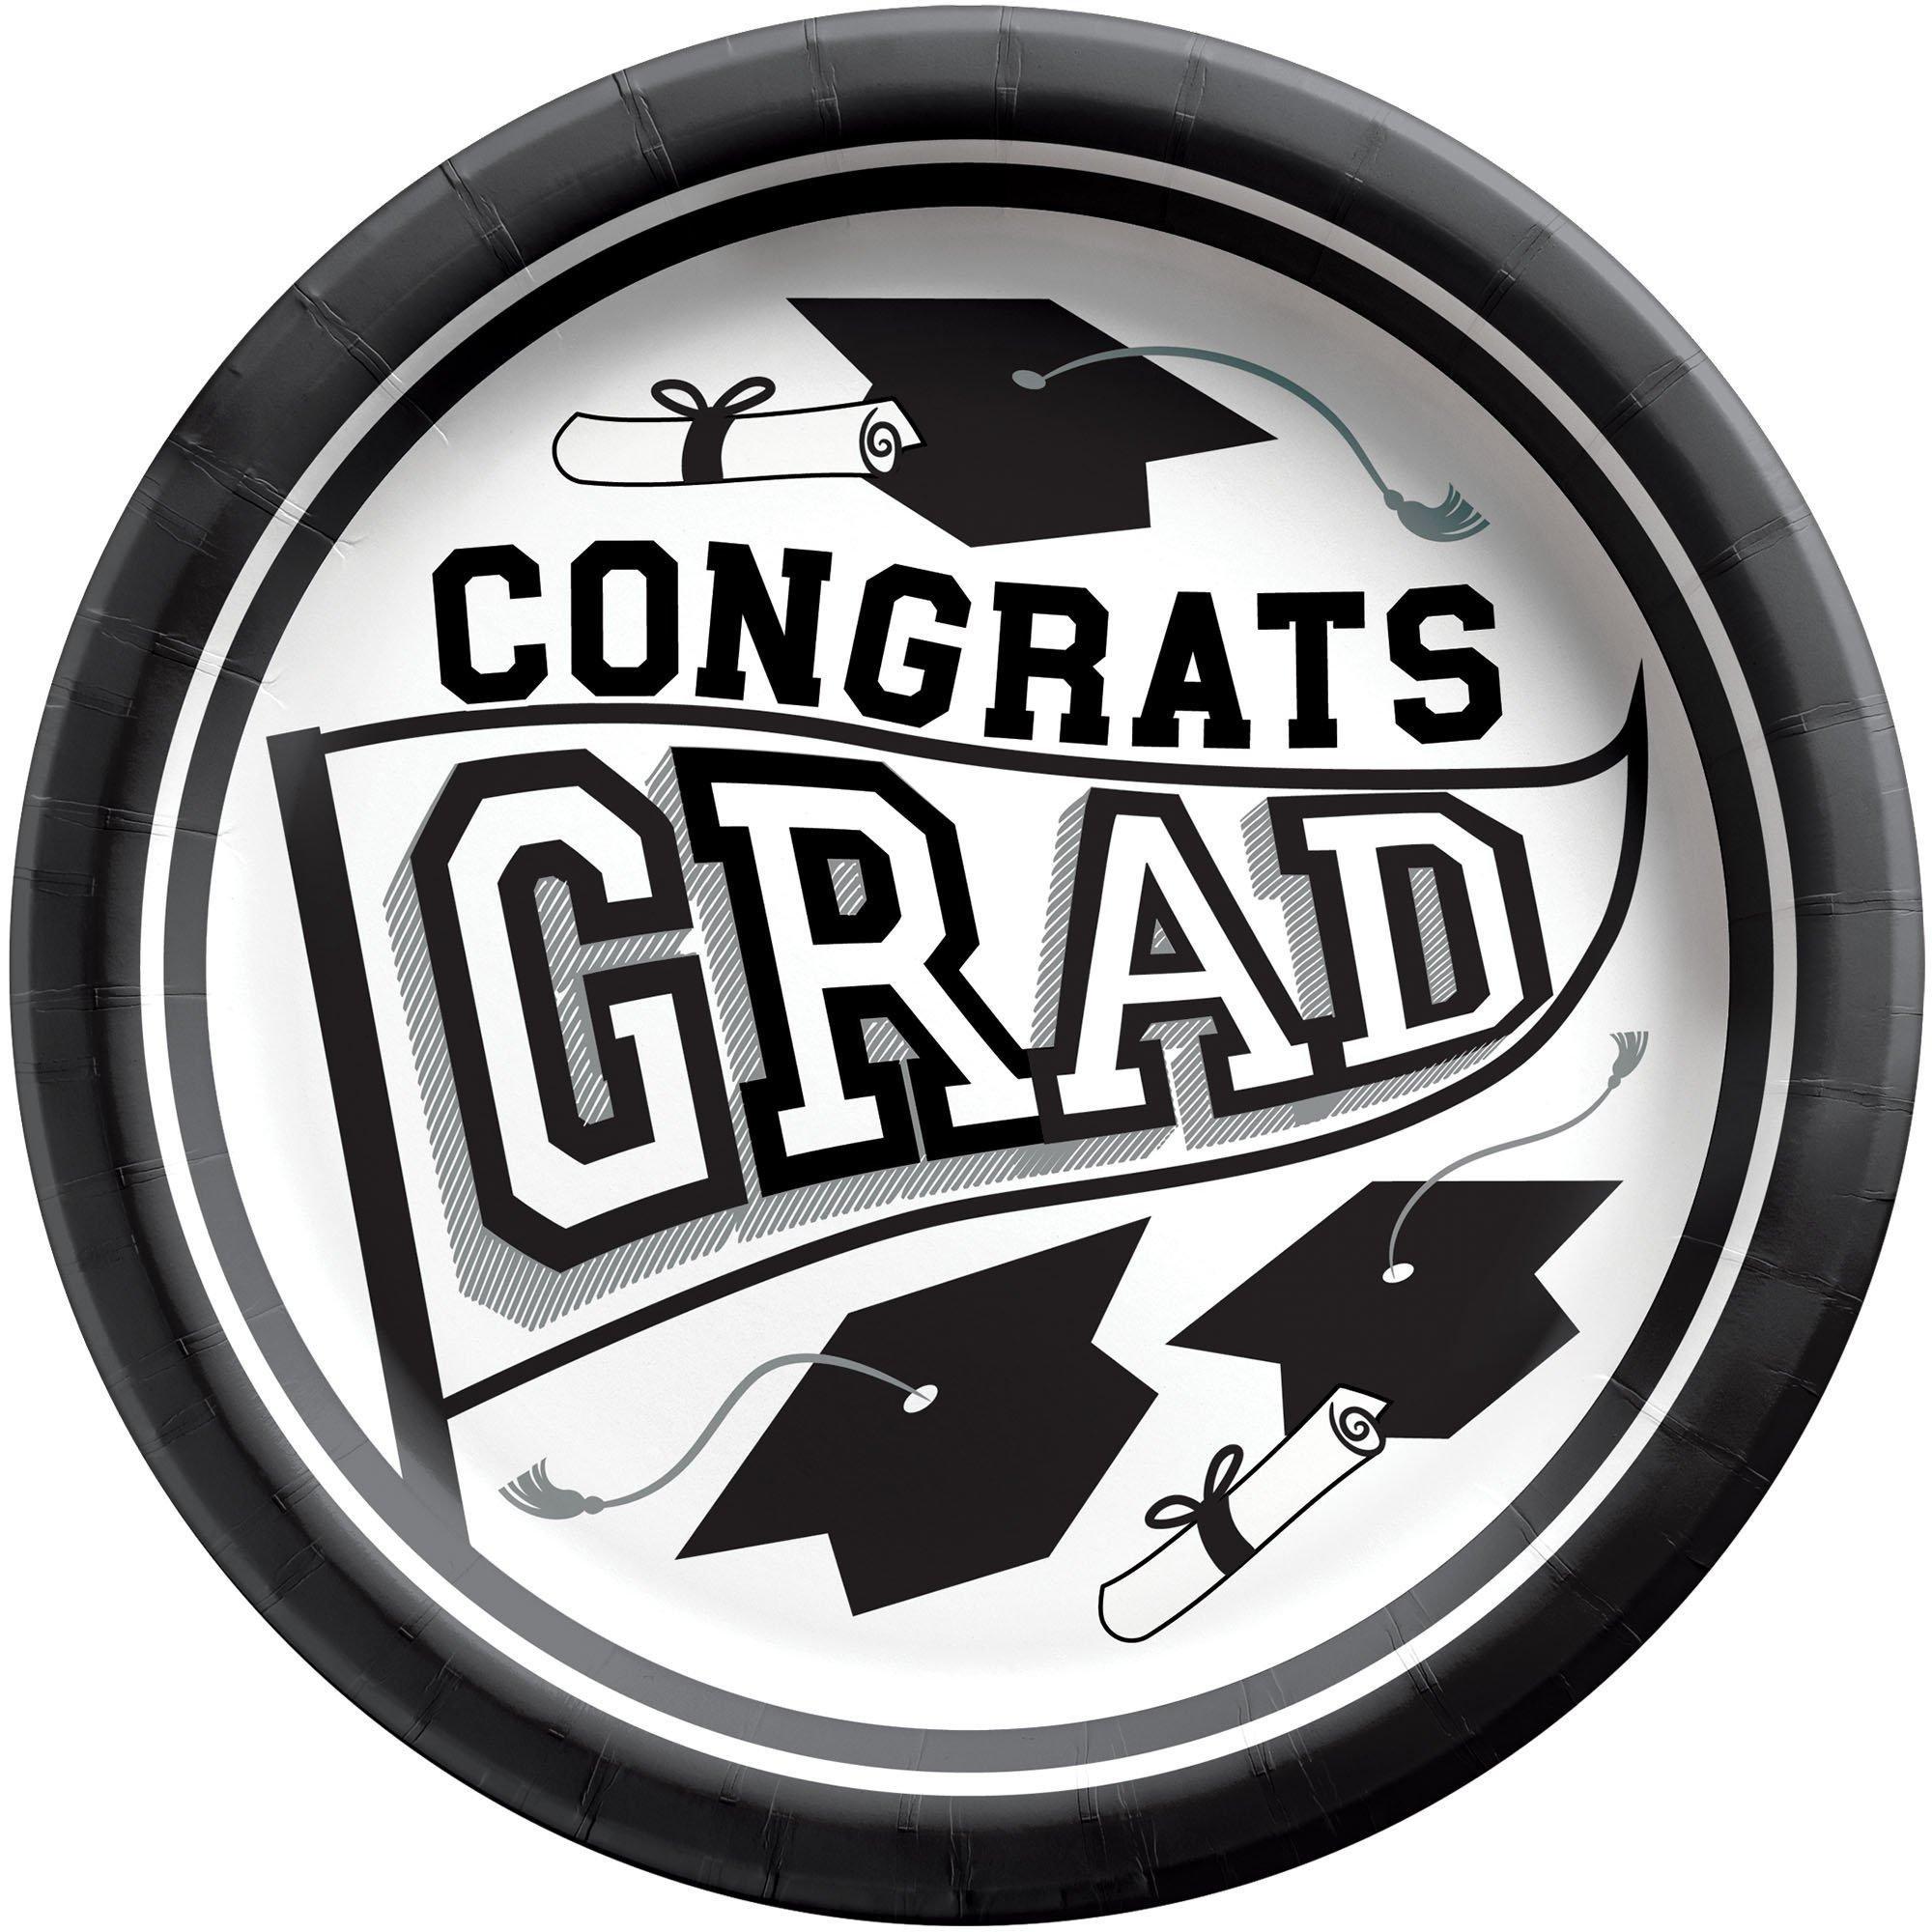 Graduation Party Supplies Kit for 40 with Decorations, Banners, Plates, Napkins, Cups - White Congrats Grad